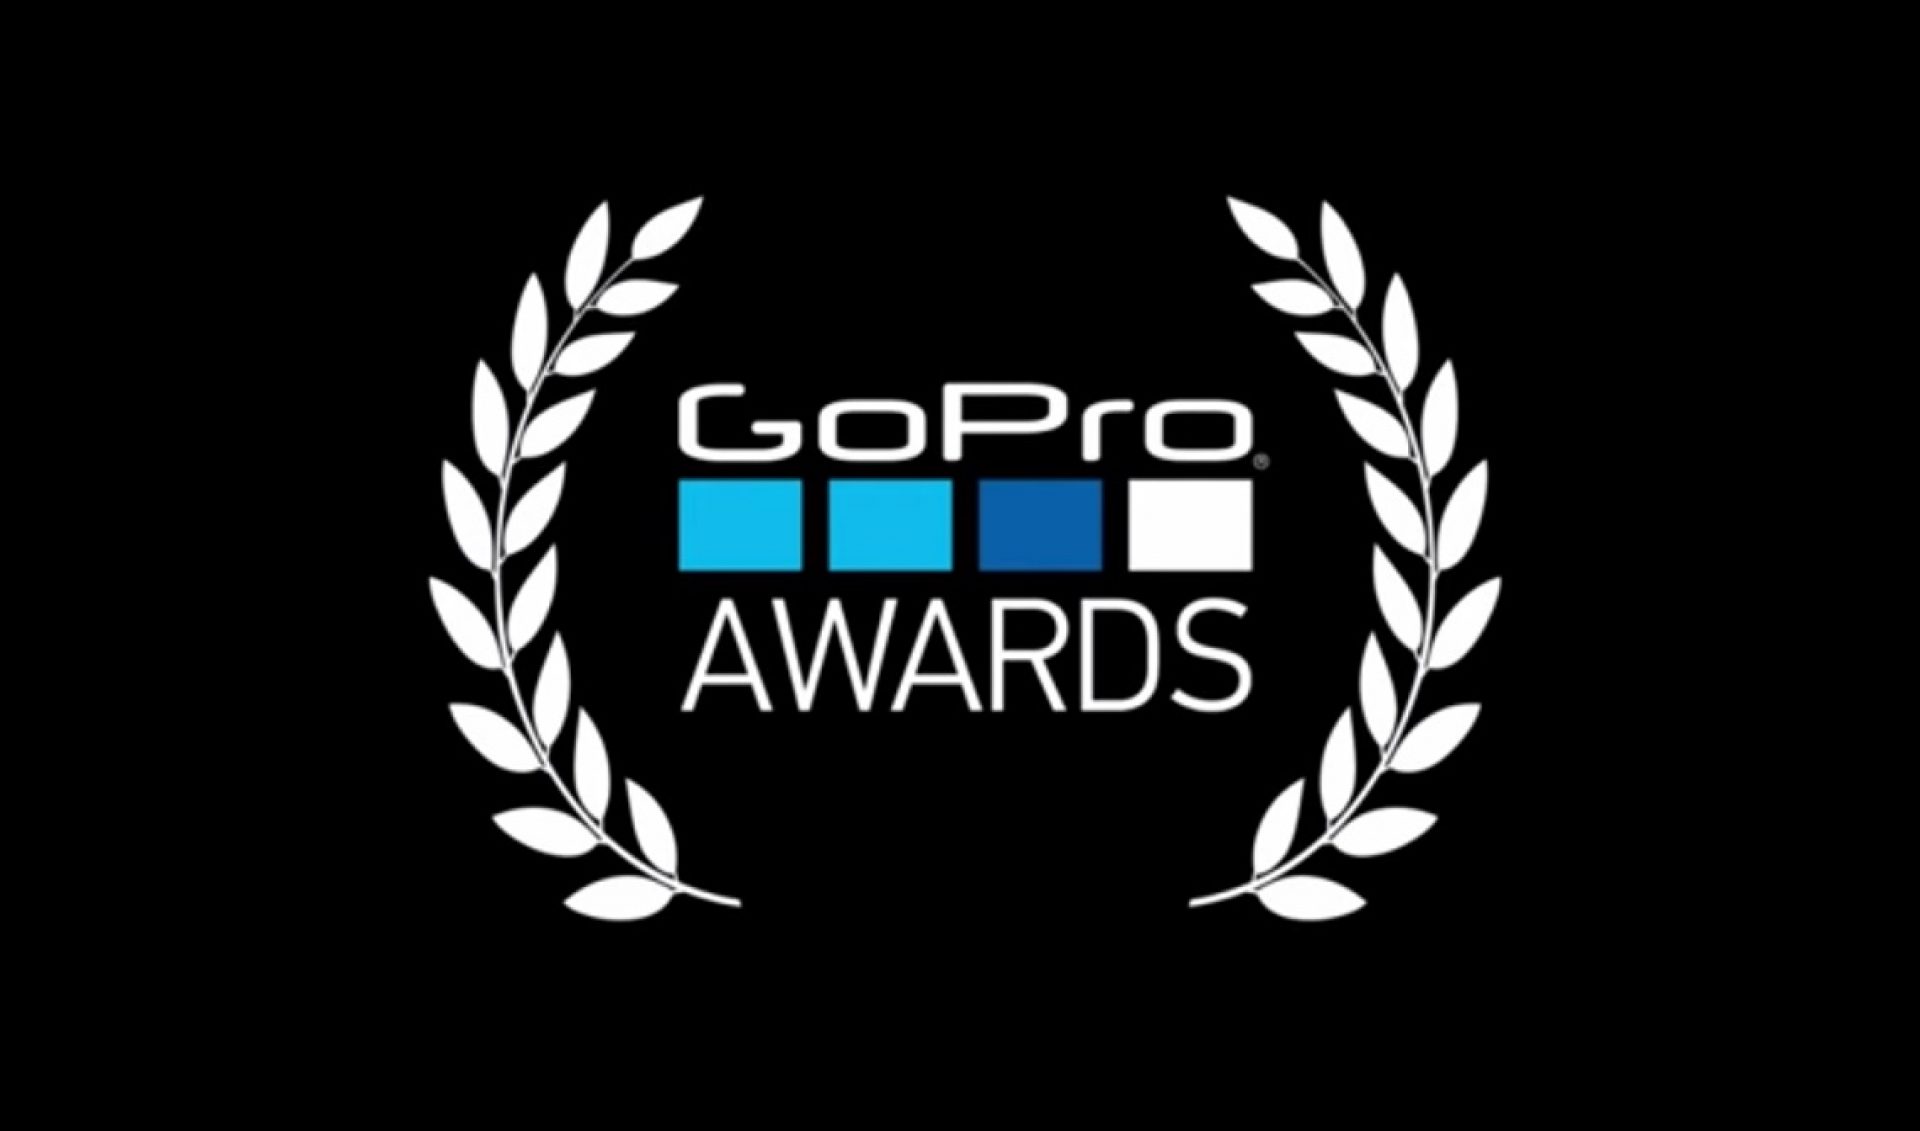 GoPro Launches Awards Program With $5 Million In Annual Payouts